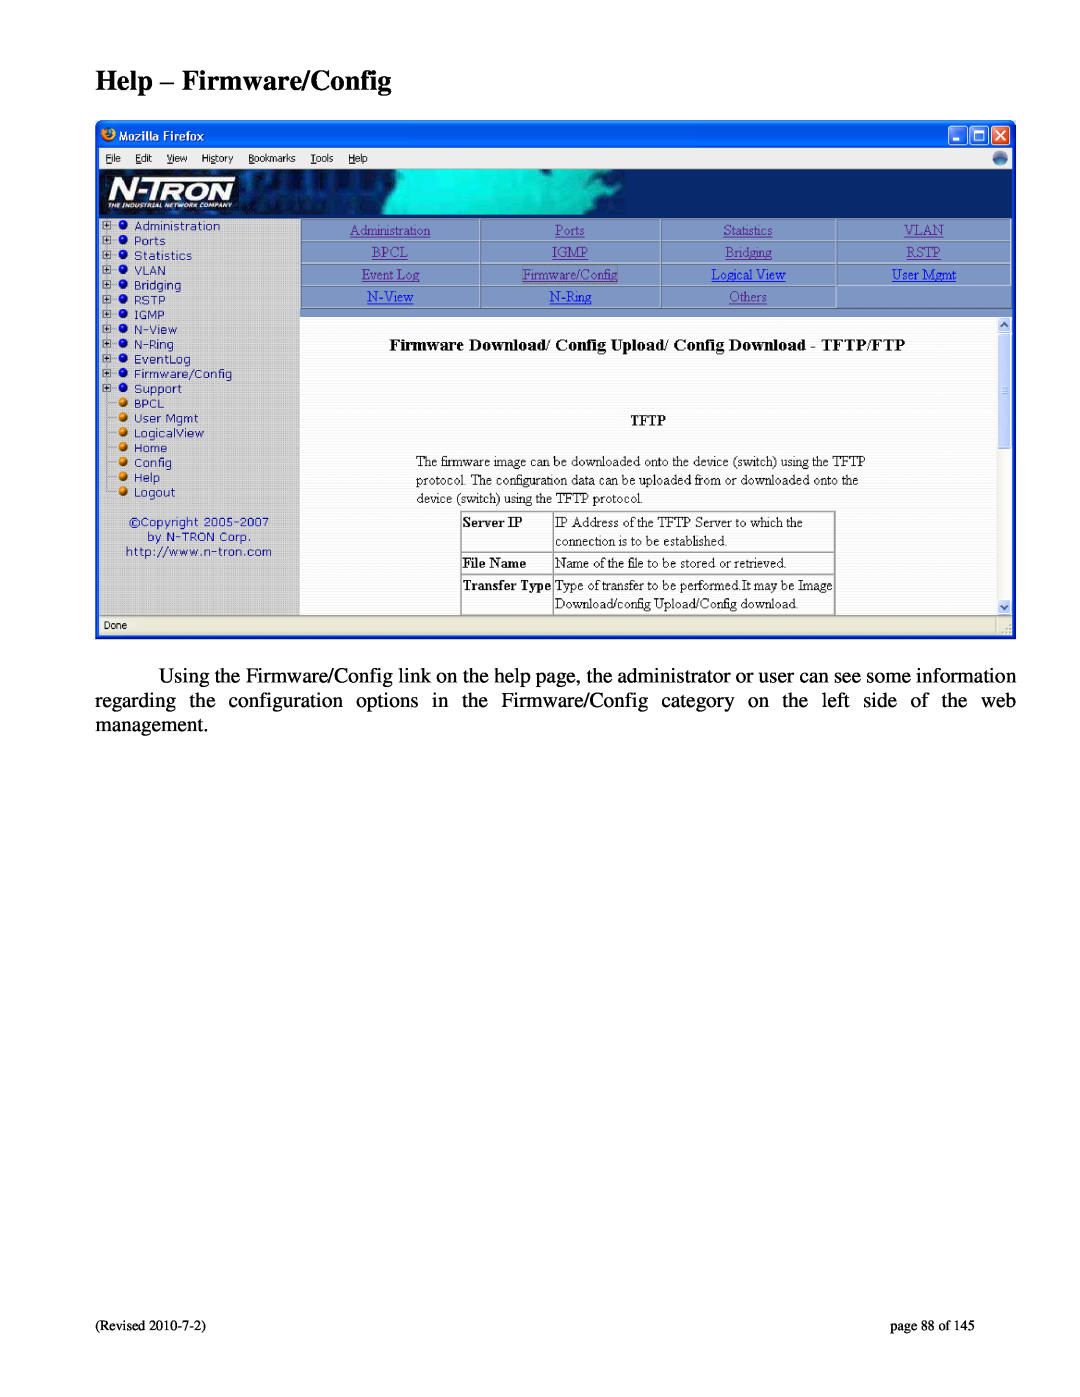 N-Tron 9000 user manual Help - Firmware/Config, page 88 of 